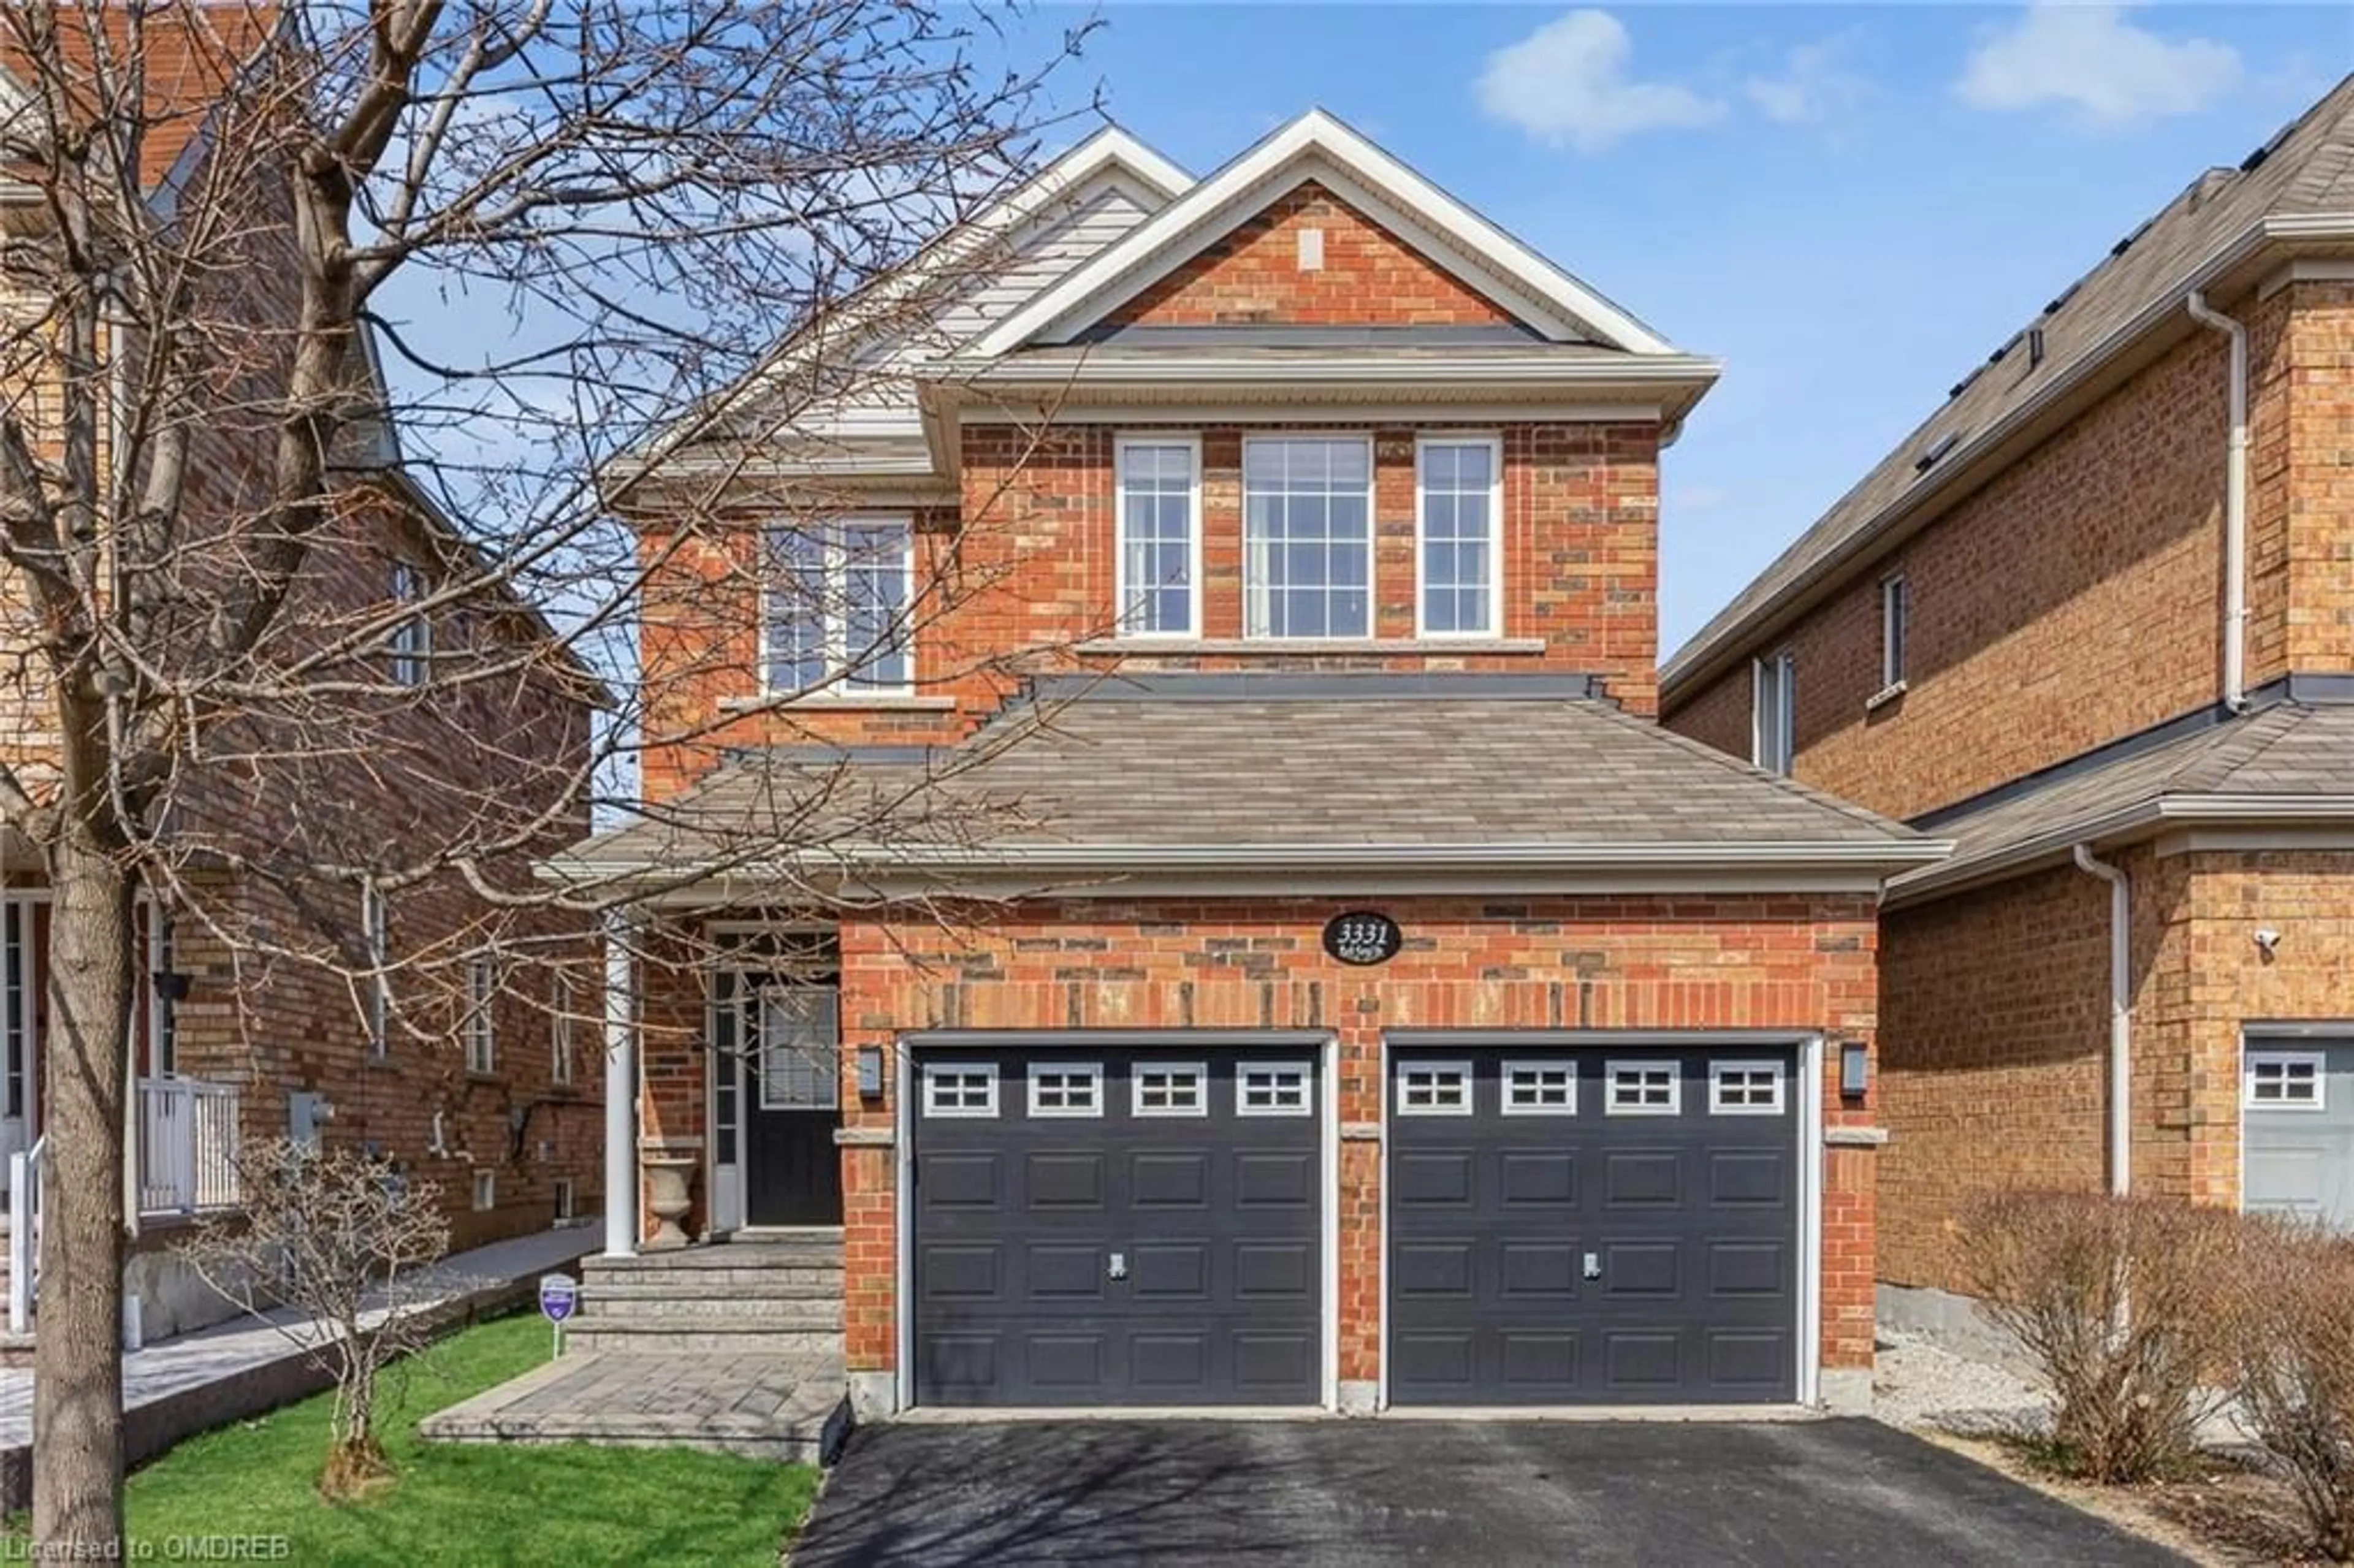 Home with brick exterior material for 3331 Ruth Fertel Dr, Mississauga Ontario L5M 0H5